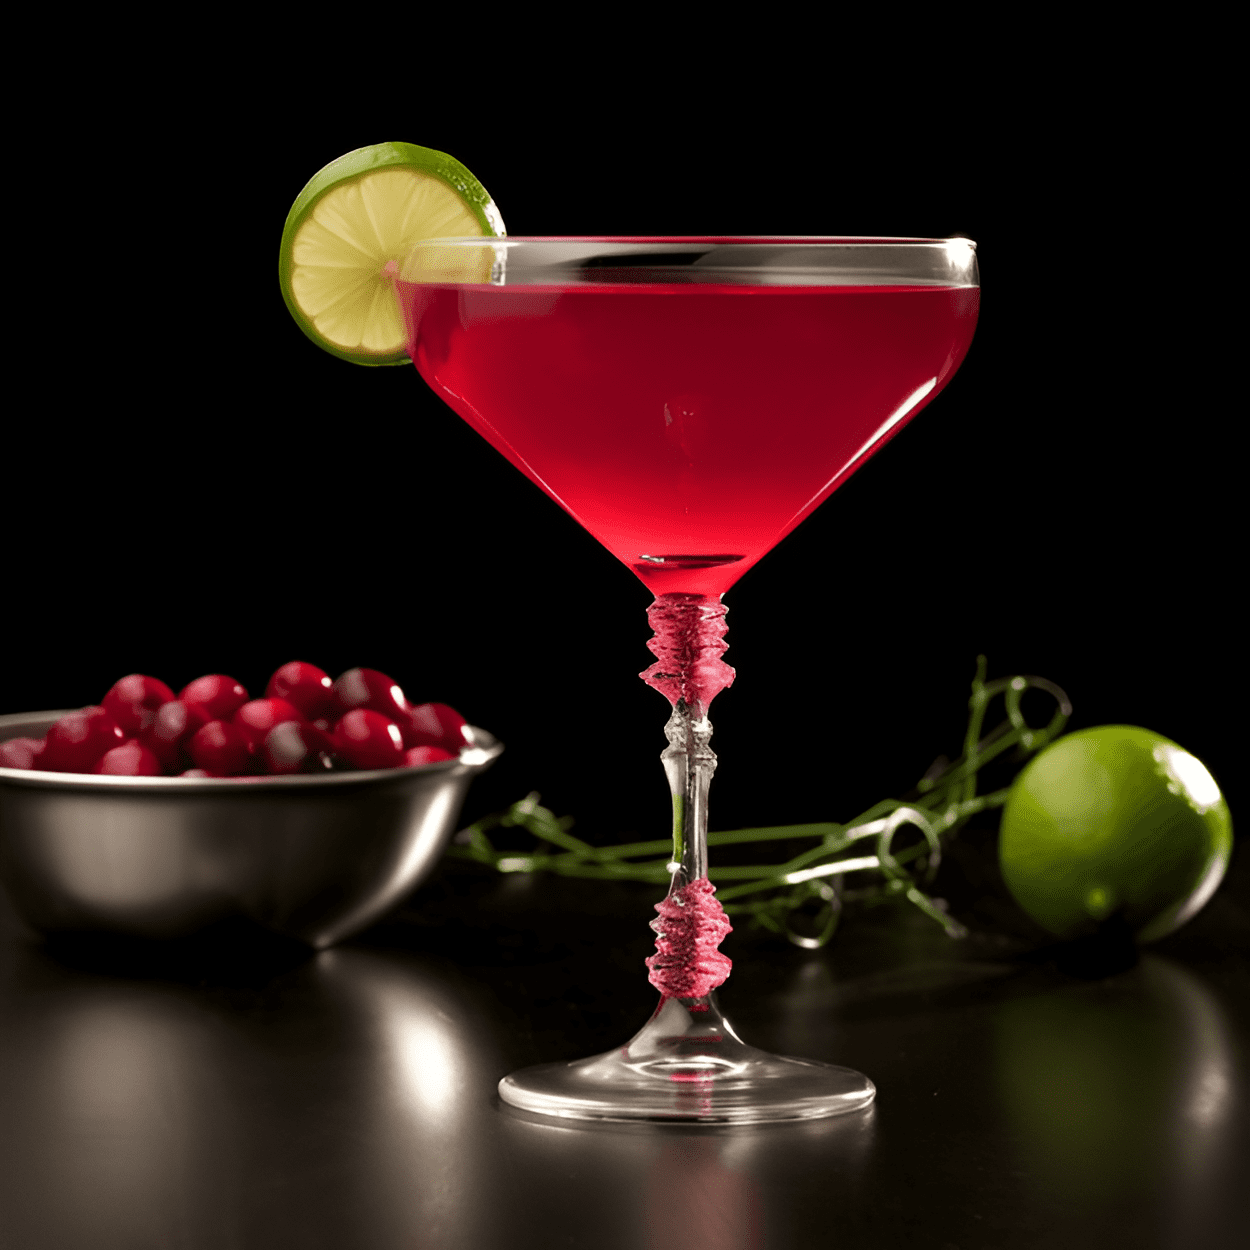 Scarlett O'Hara Cocktail Recipe - The Scarlett O'Hara cocktail is a delightful combination of sweet, sour, and fruity flavors. The cranberry juice adds a tartness that balances the sweetness of the Southern Comfort, while the lime juice provides a refreshing citrus twist.